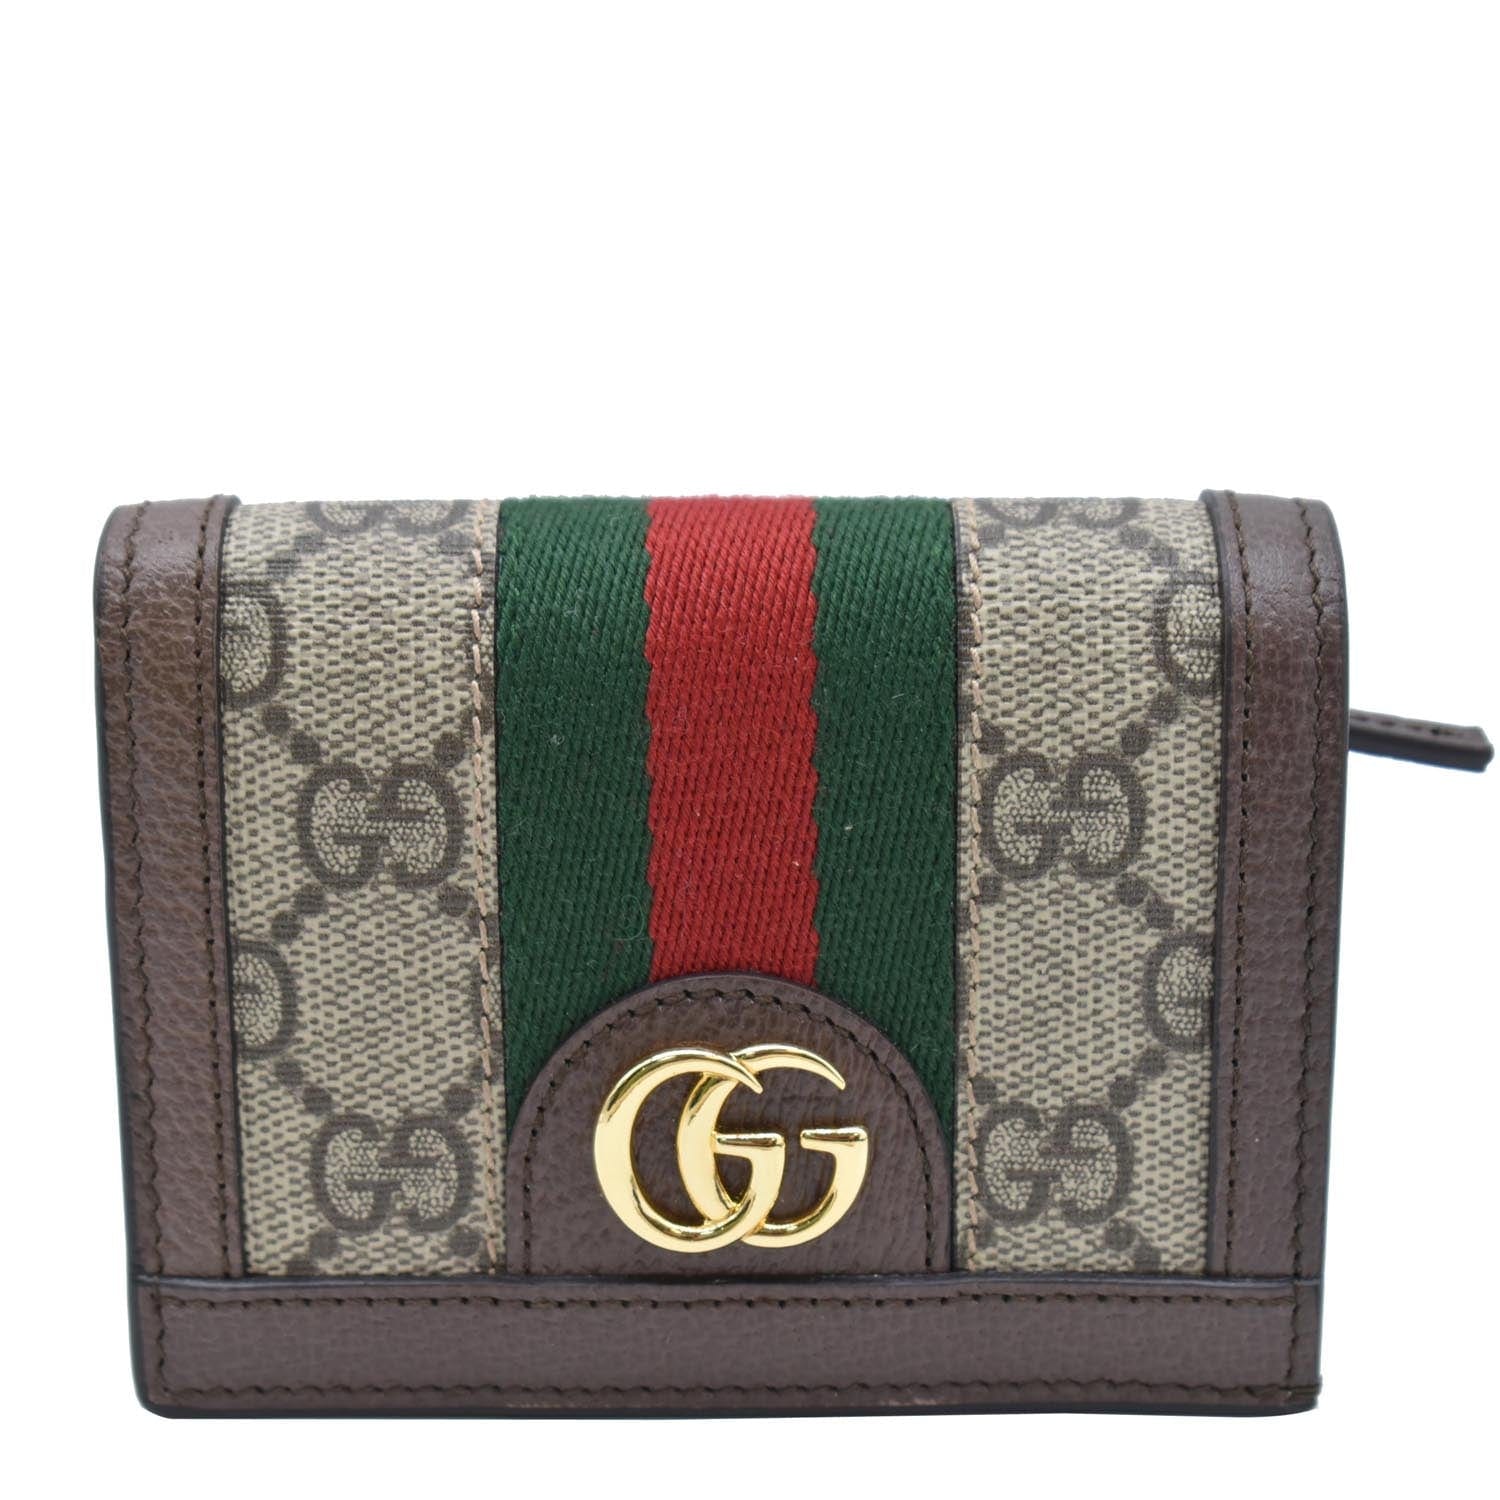 Authentic GUCCI Card Case Business Card Holder Leather Genuine Leather Black